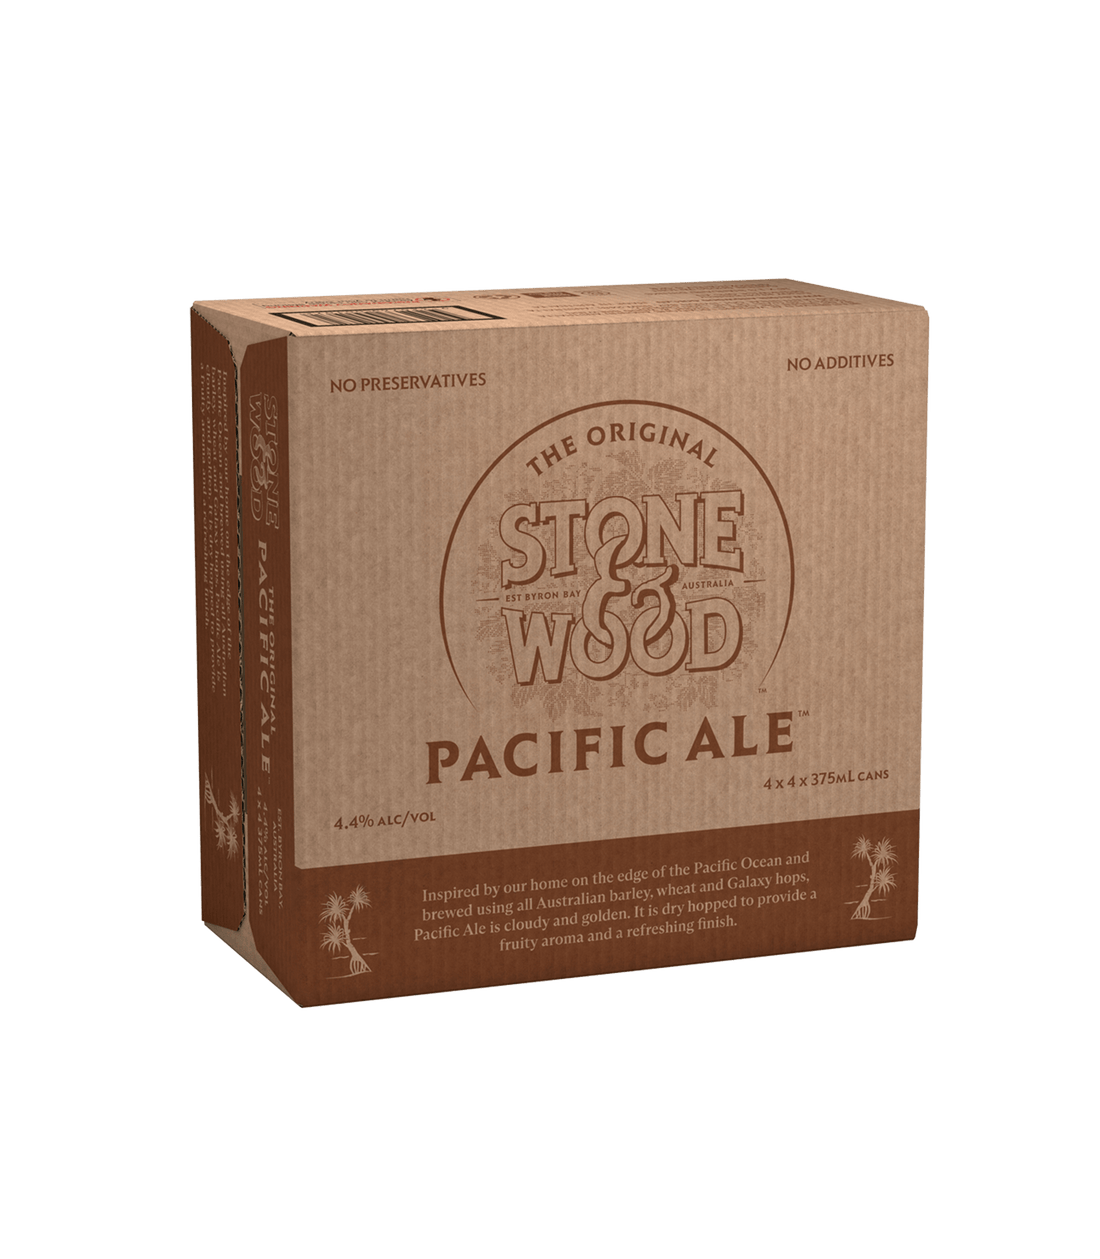 Stone & Wood Pacific Ale cans carton